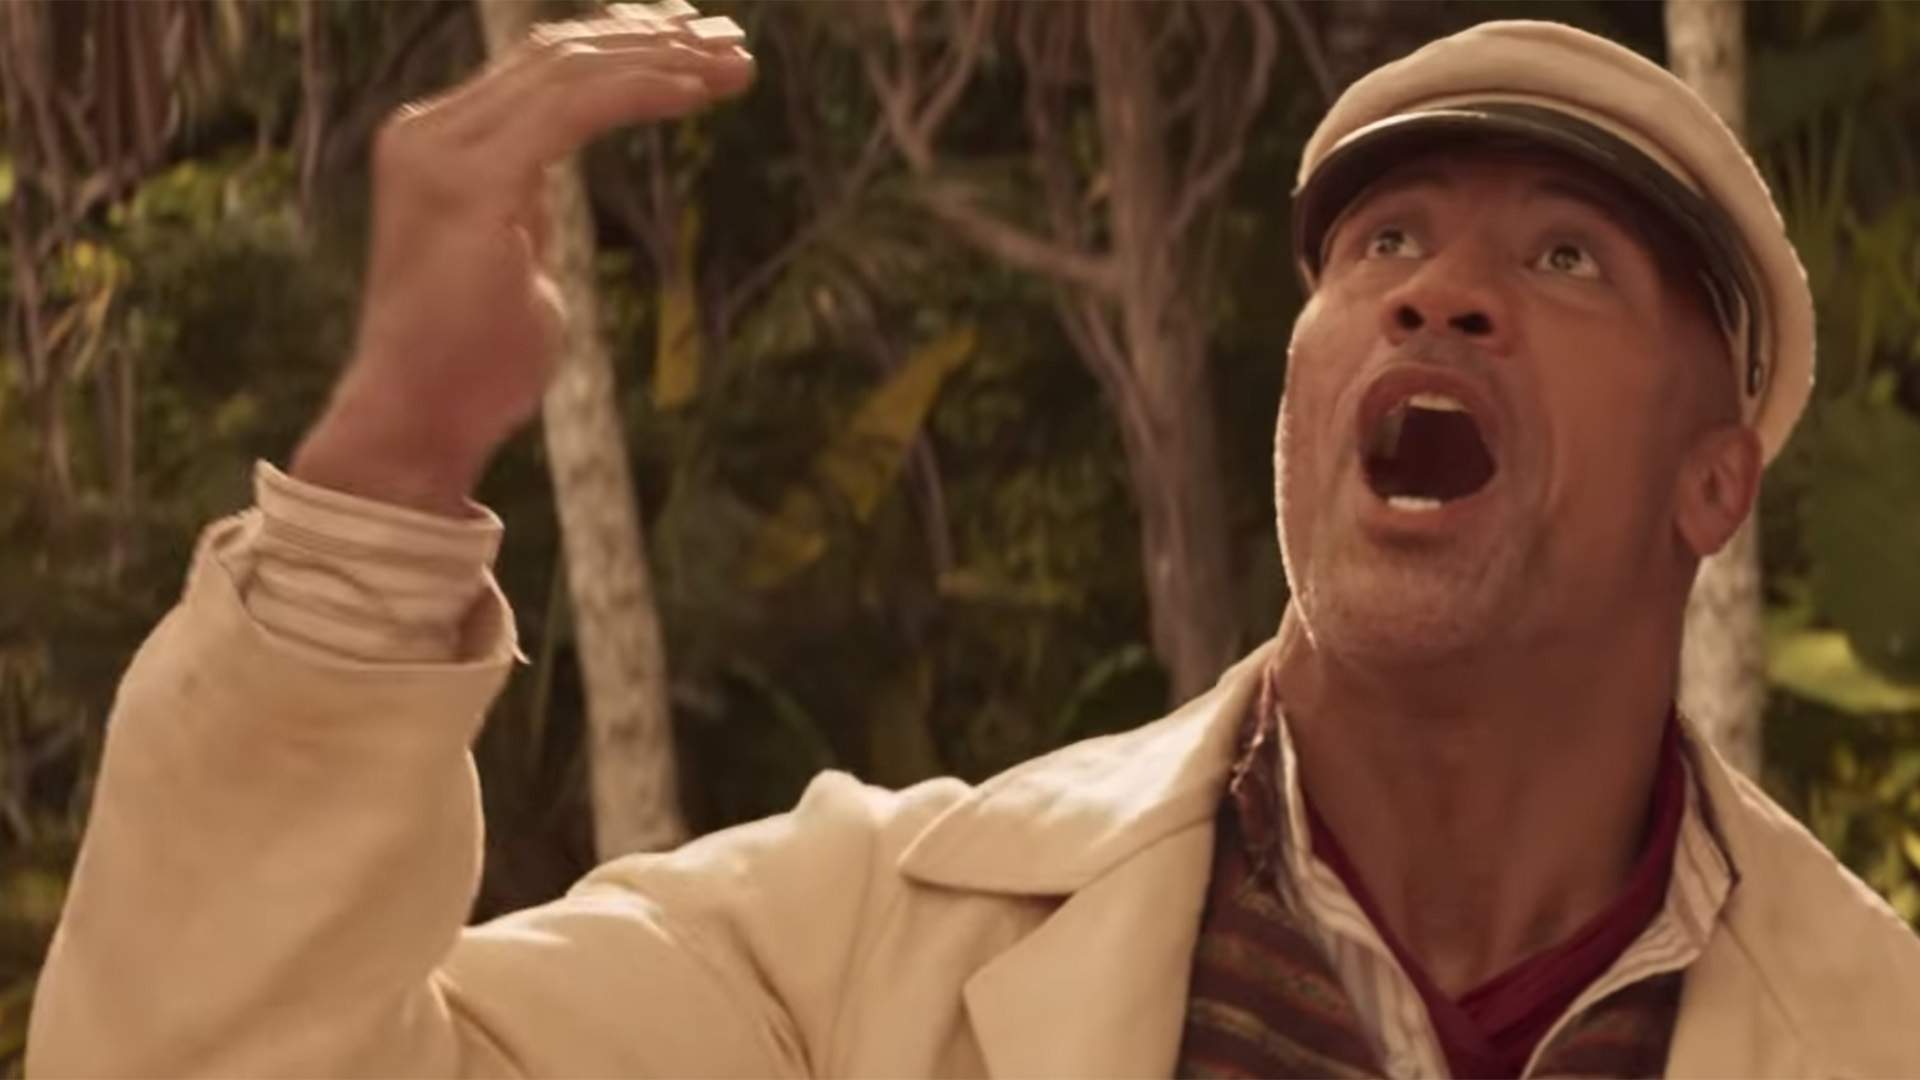 The First Trailer for 'Jungle Cruise' Takes Emily Blunt and Dwayne Johnson on a Wet and Wild Adventure